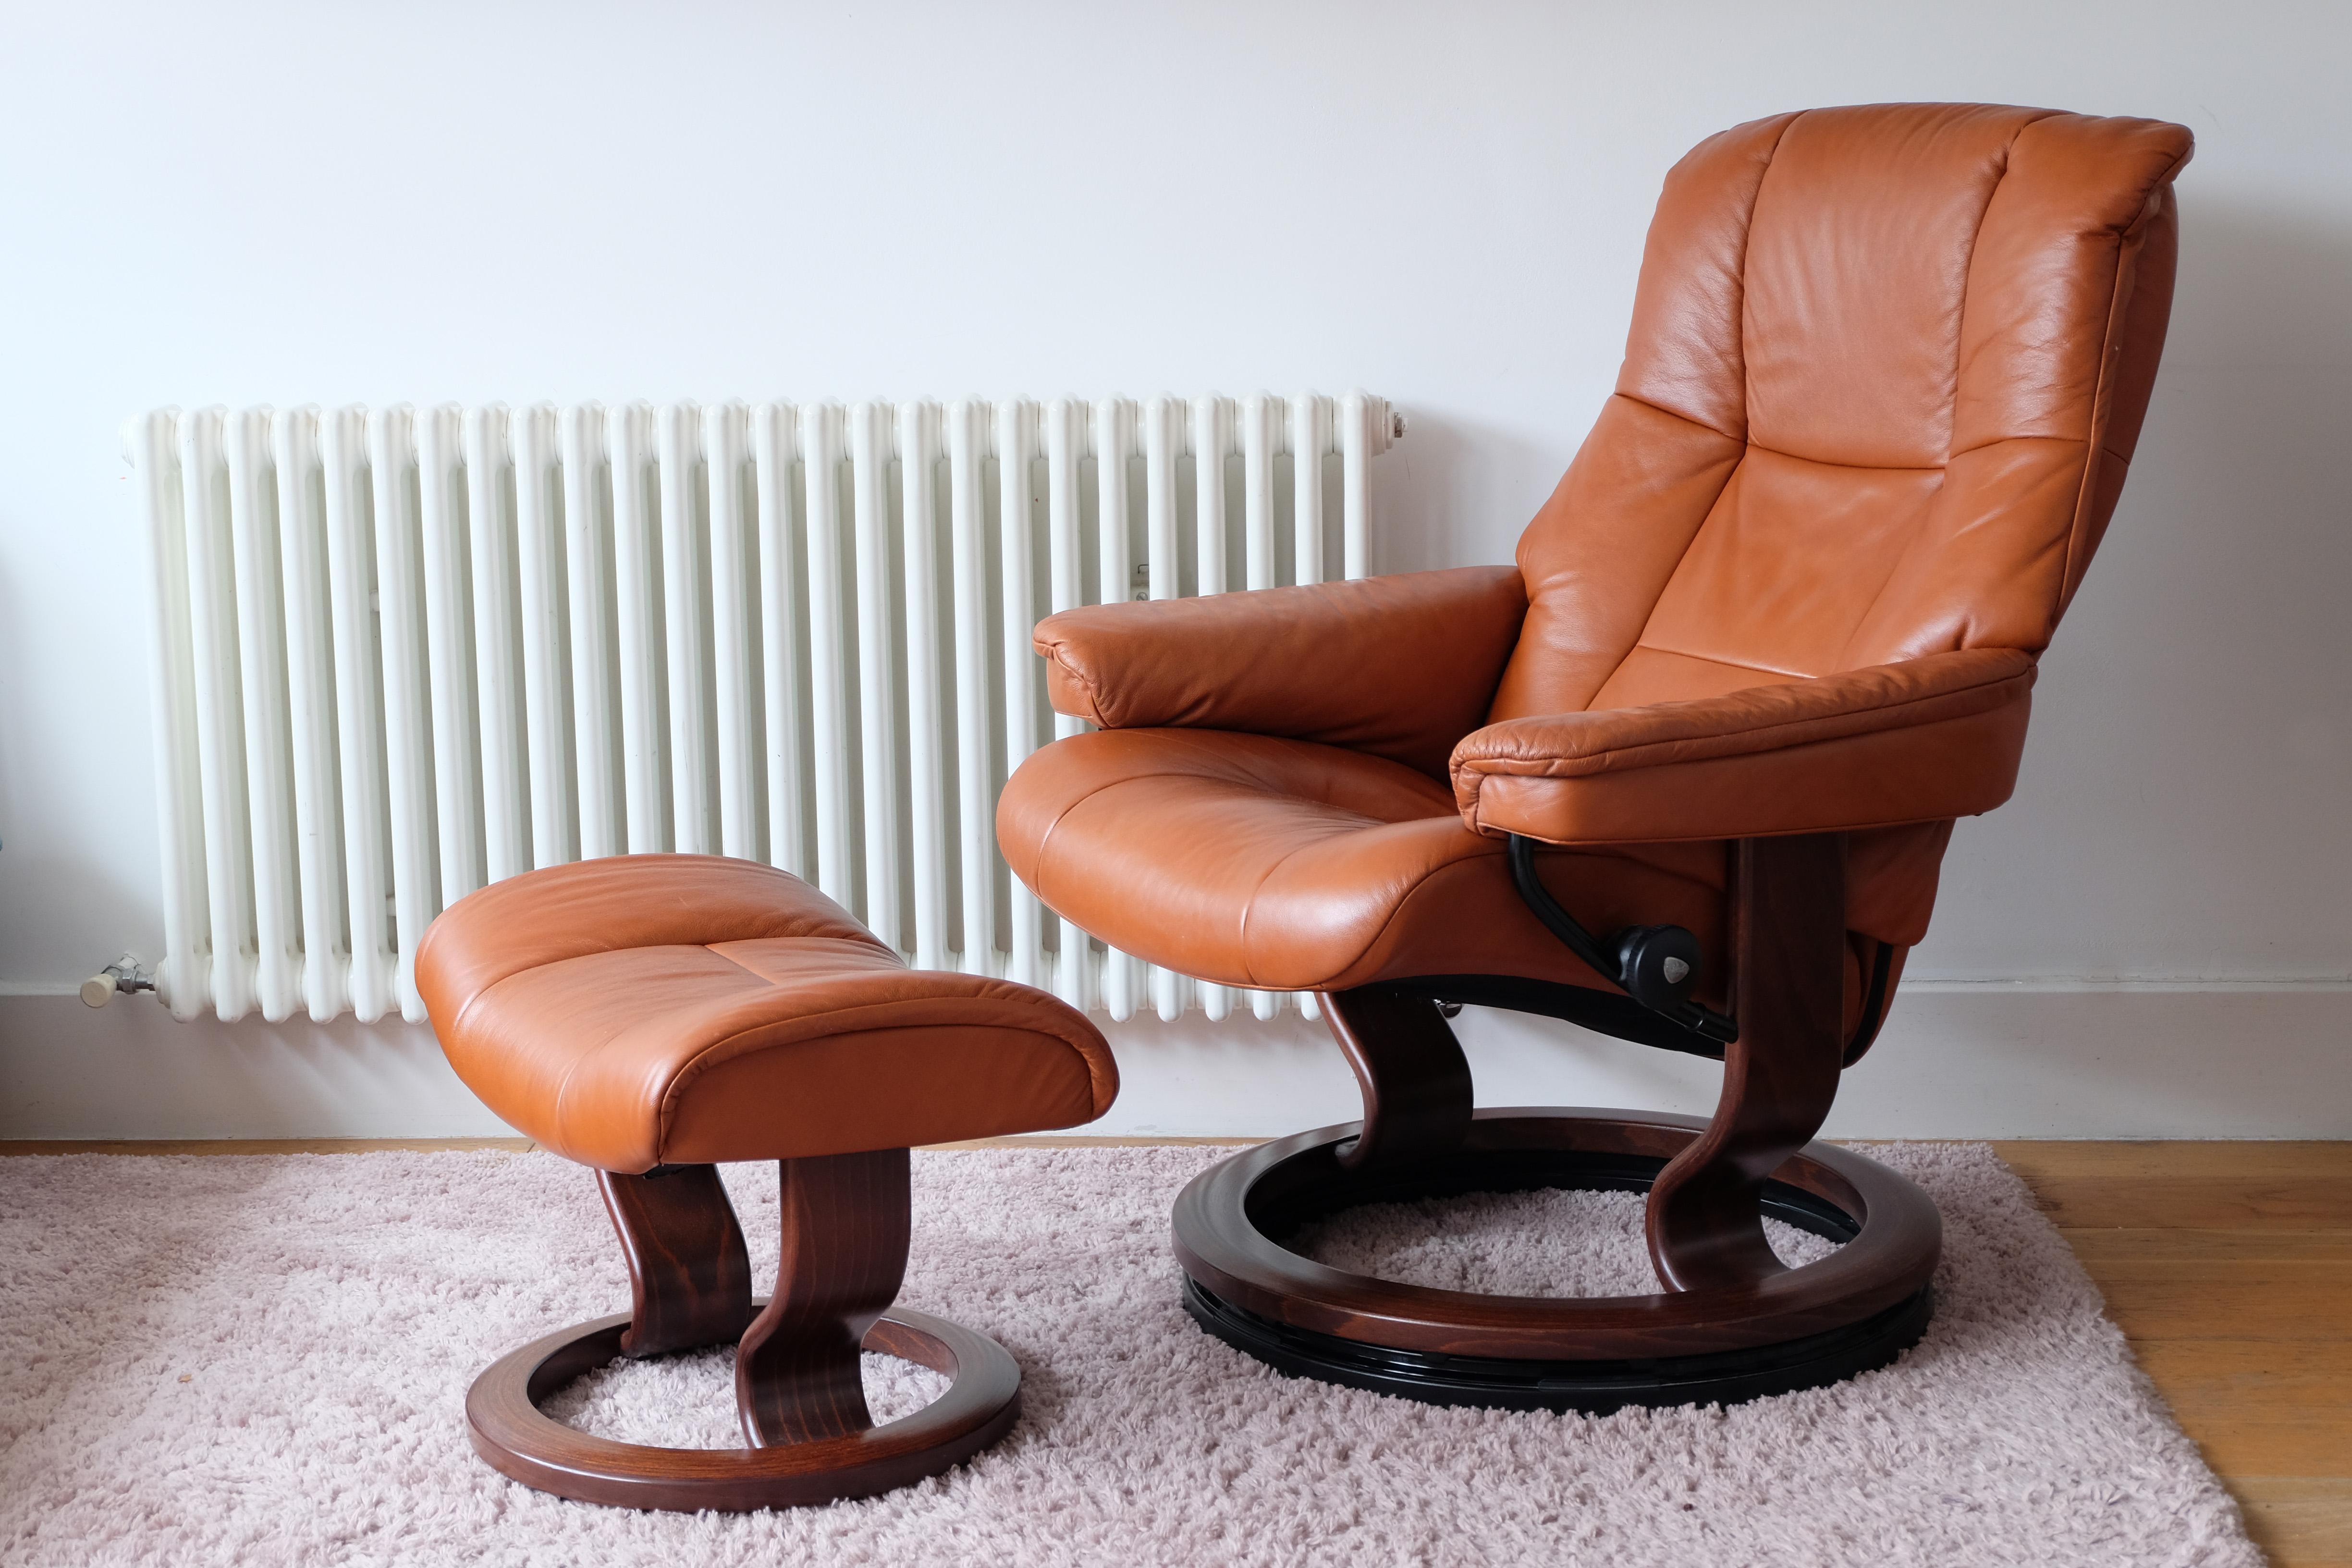 A very good condition tan leather Ekornes Stressless Mayfair lounge chair with footstool.

With a swivel base and light touch recline mechanism, the stressless chair has earned a reputation as one of the most comfortable lounge chairs in